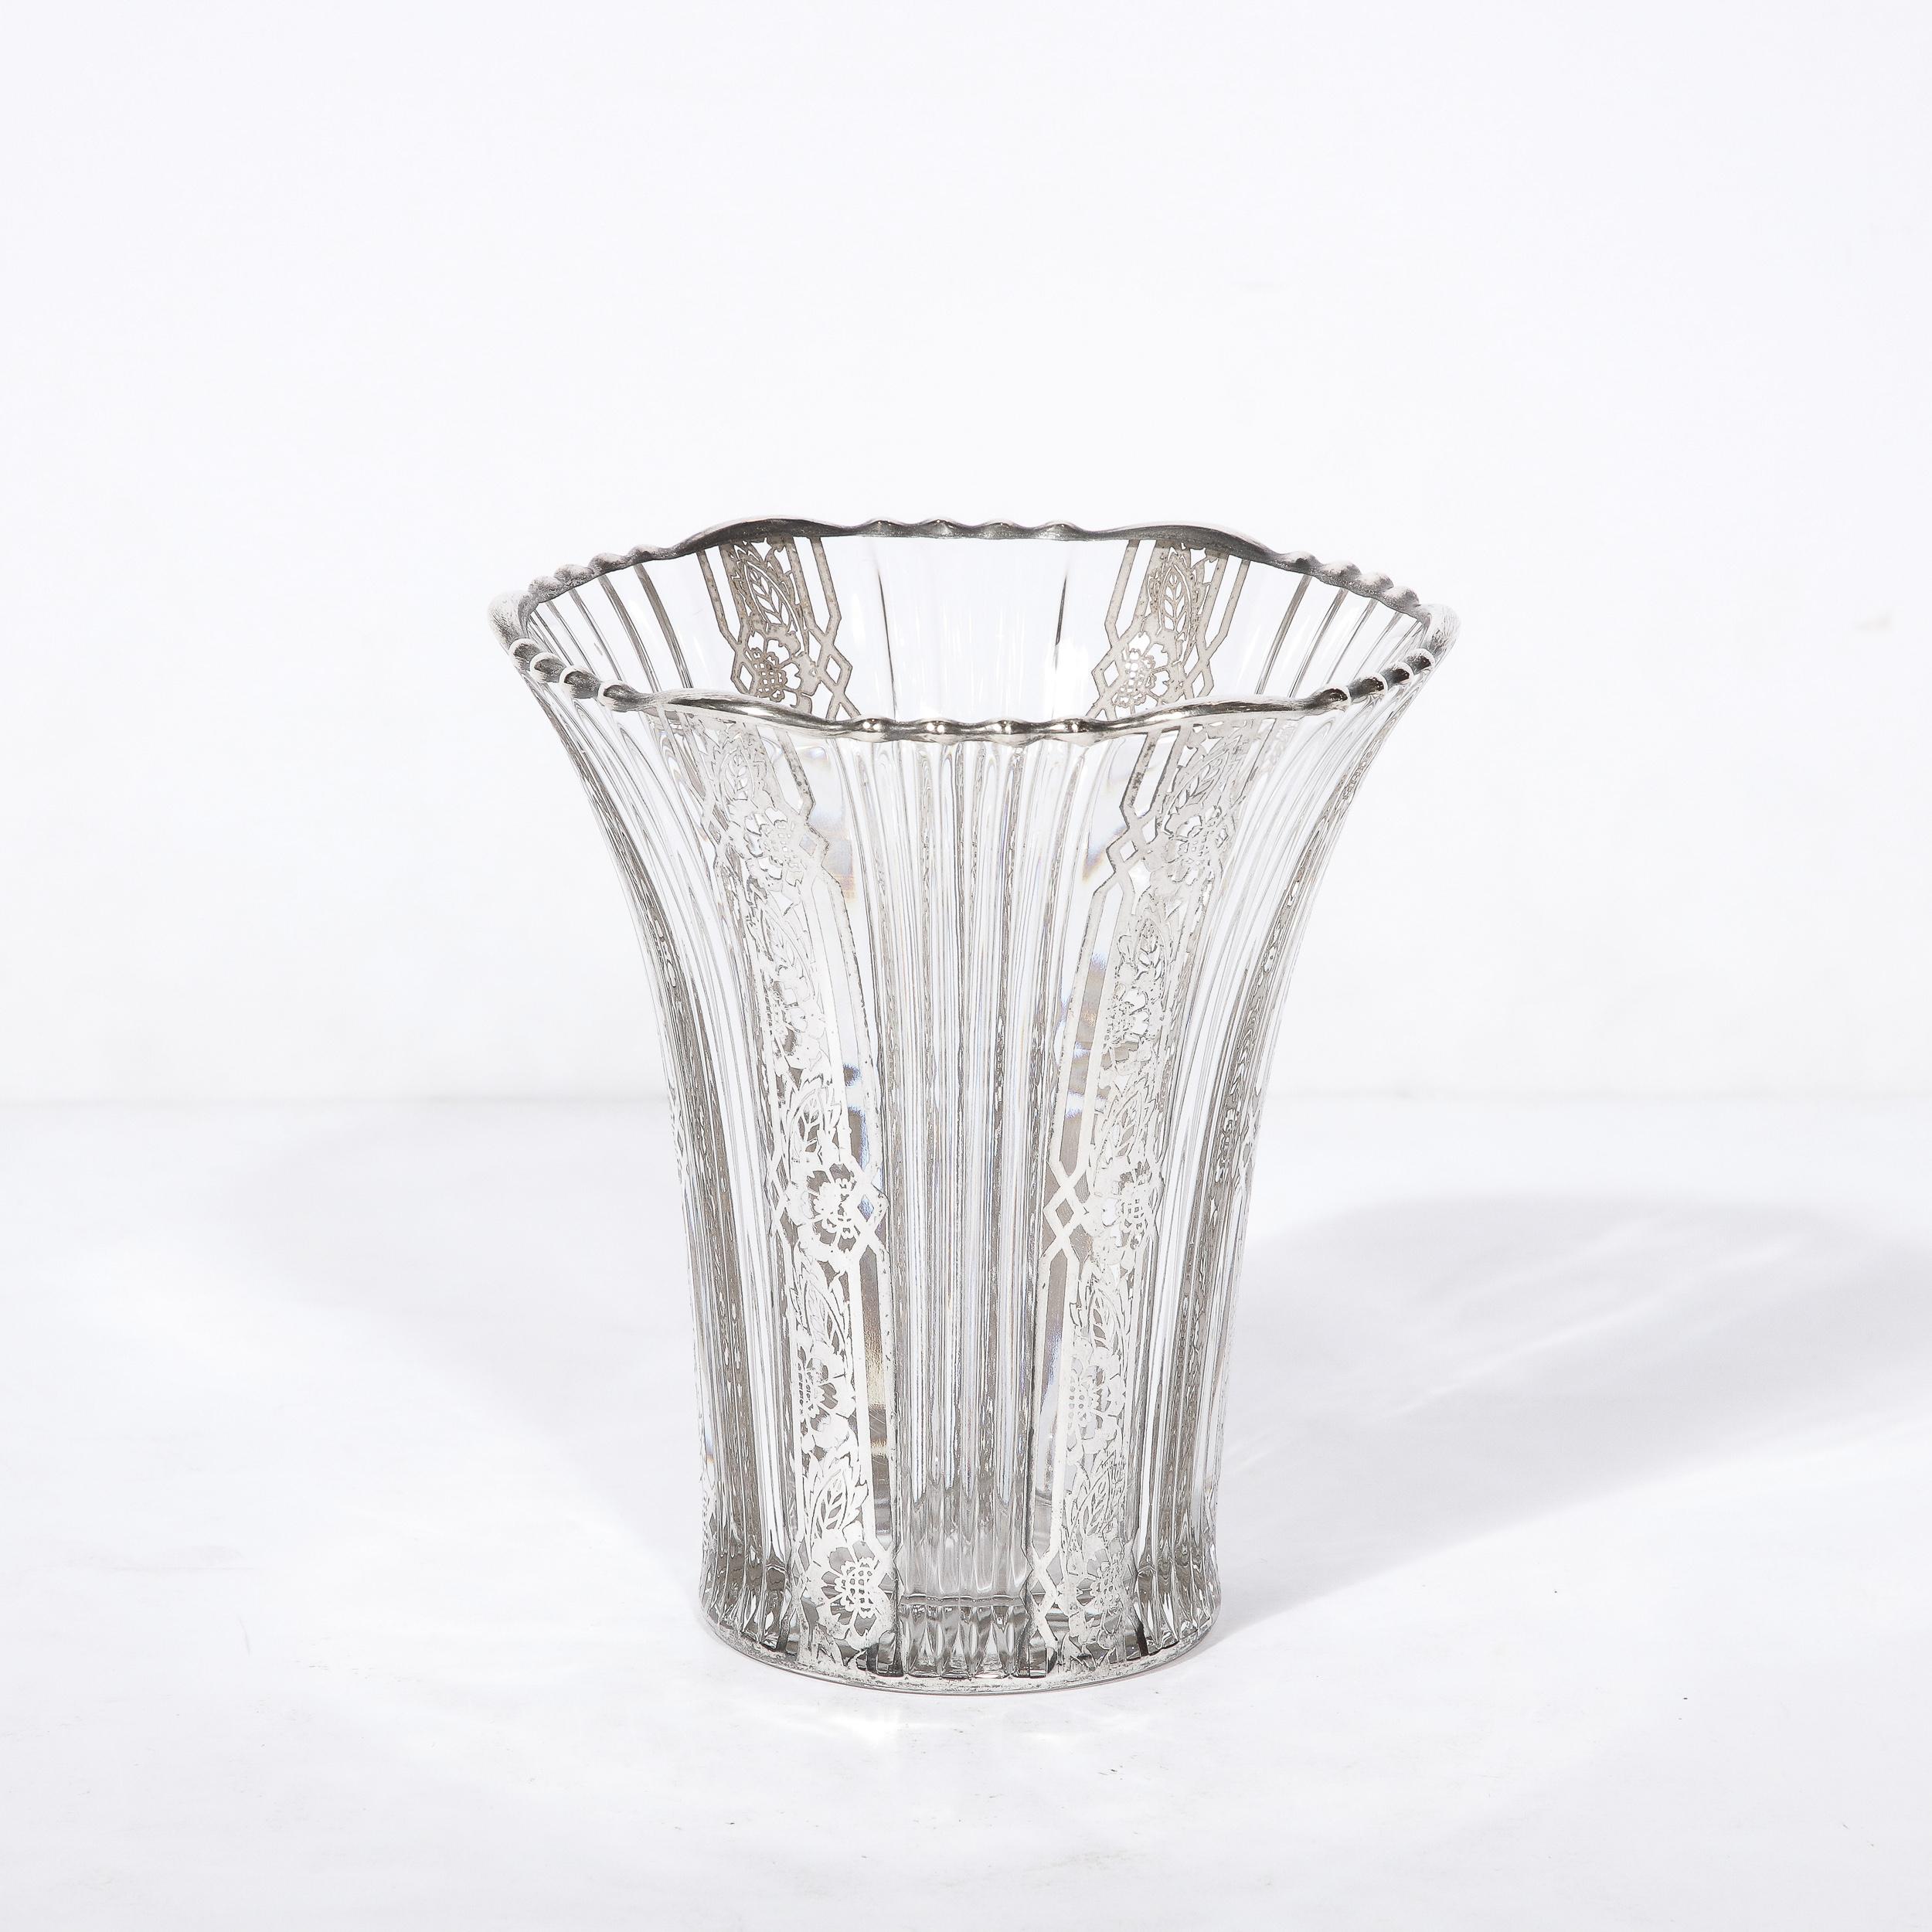 Crafted in the United States circa 1930, with an Art Deco geometric sterling silver overlay that adorns the rippling edges of the top and bottom of the vases, this pair is a lovely example of vases from the era. Decorative details of natural imagery